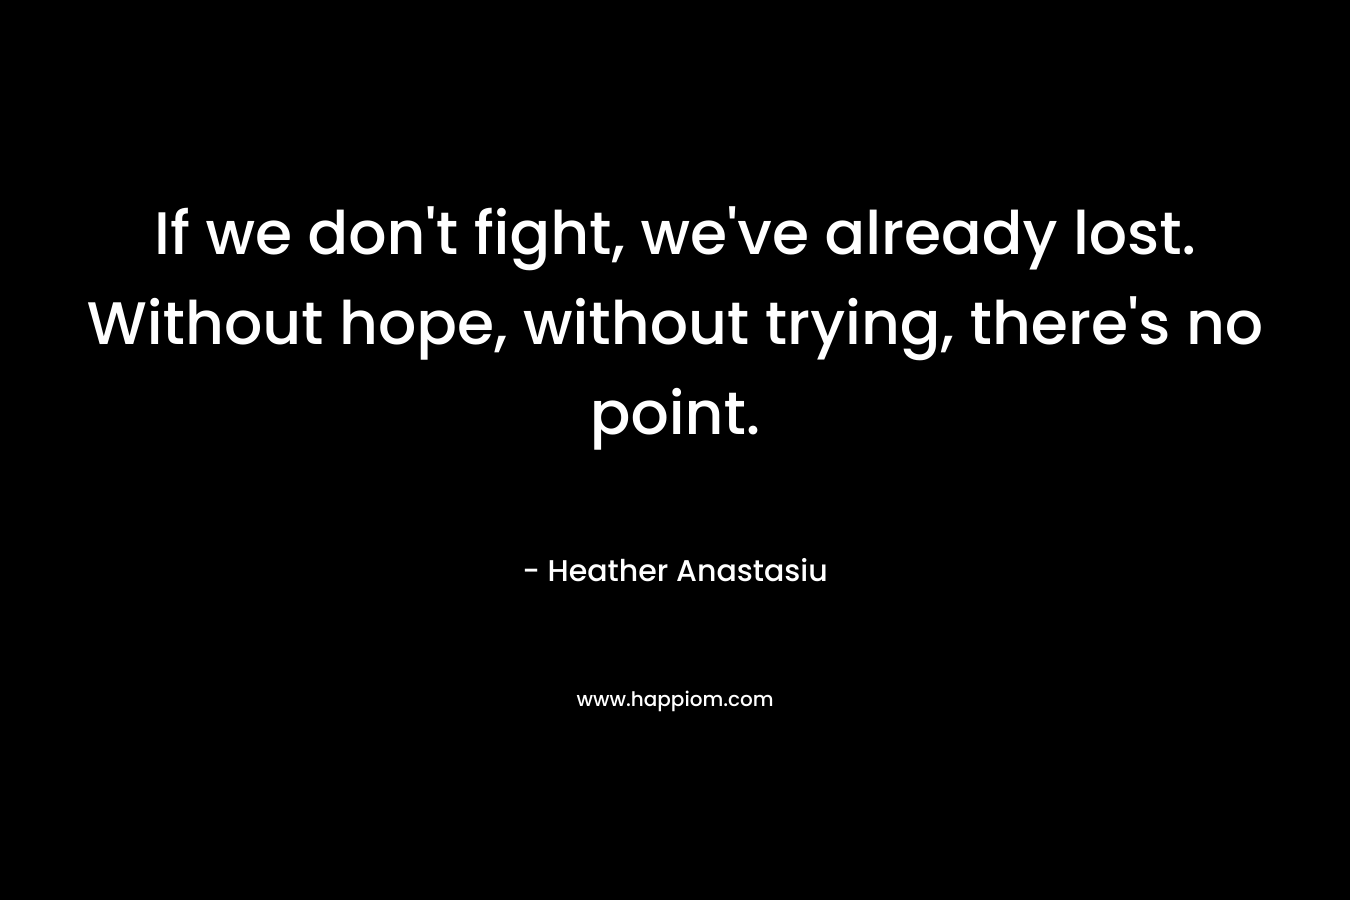 If we don't fight, we've already lost. Without hope, without trying, there's no point.